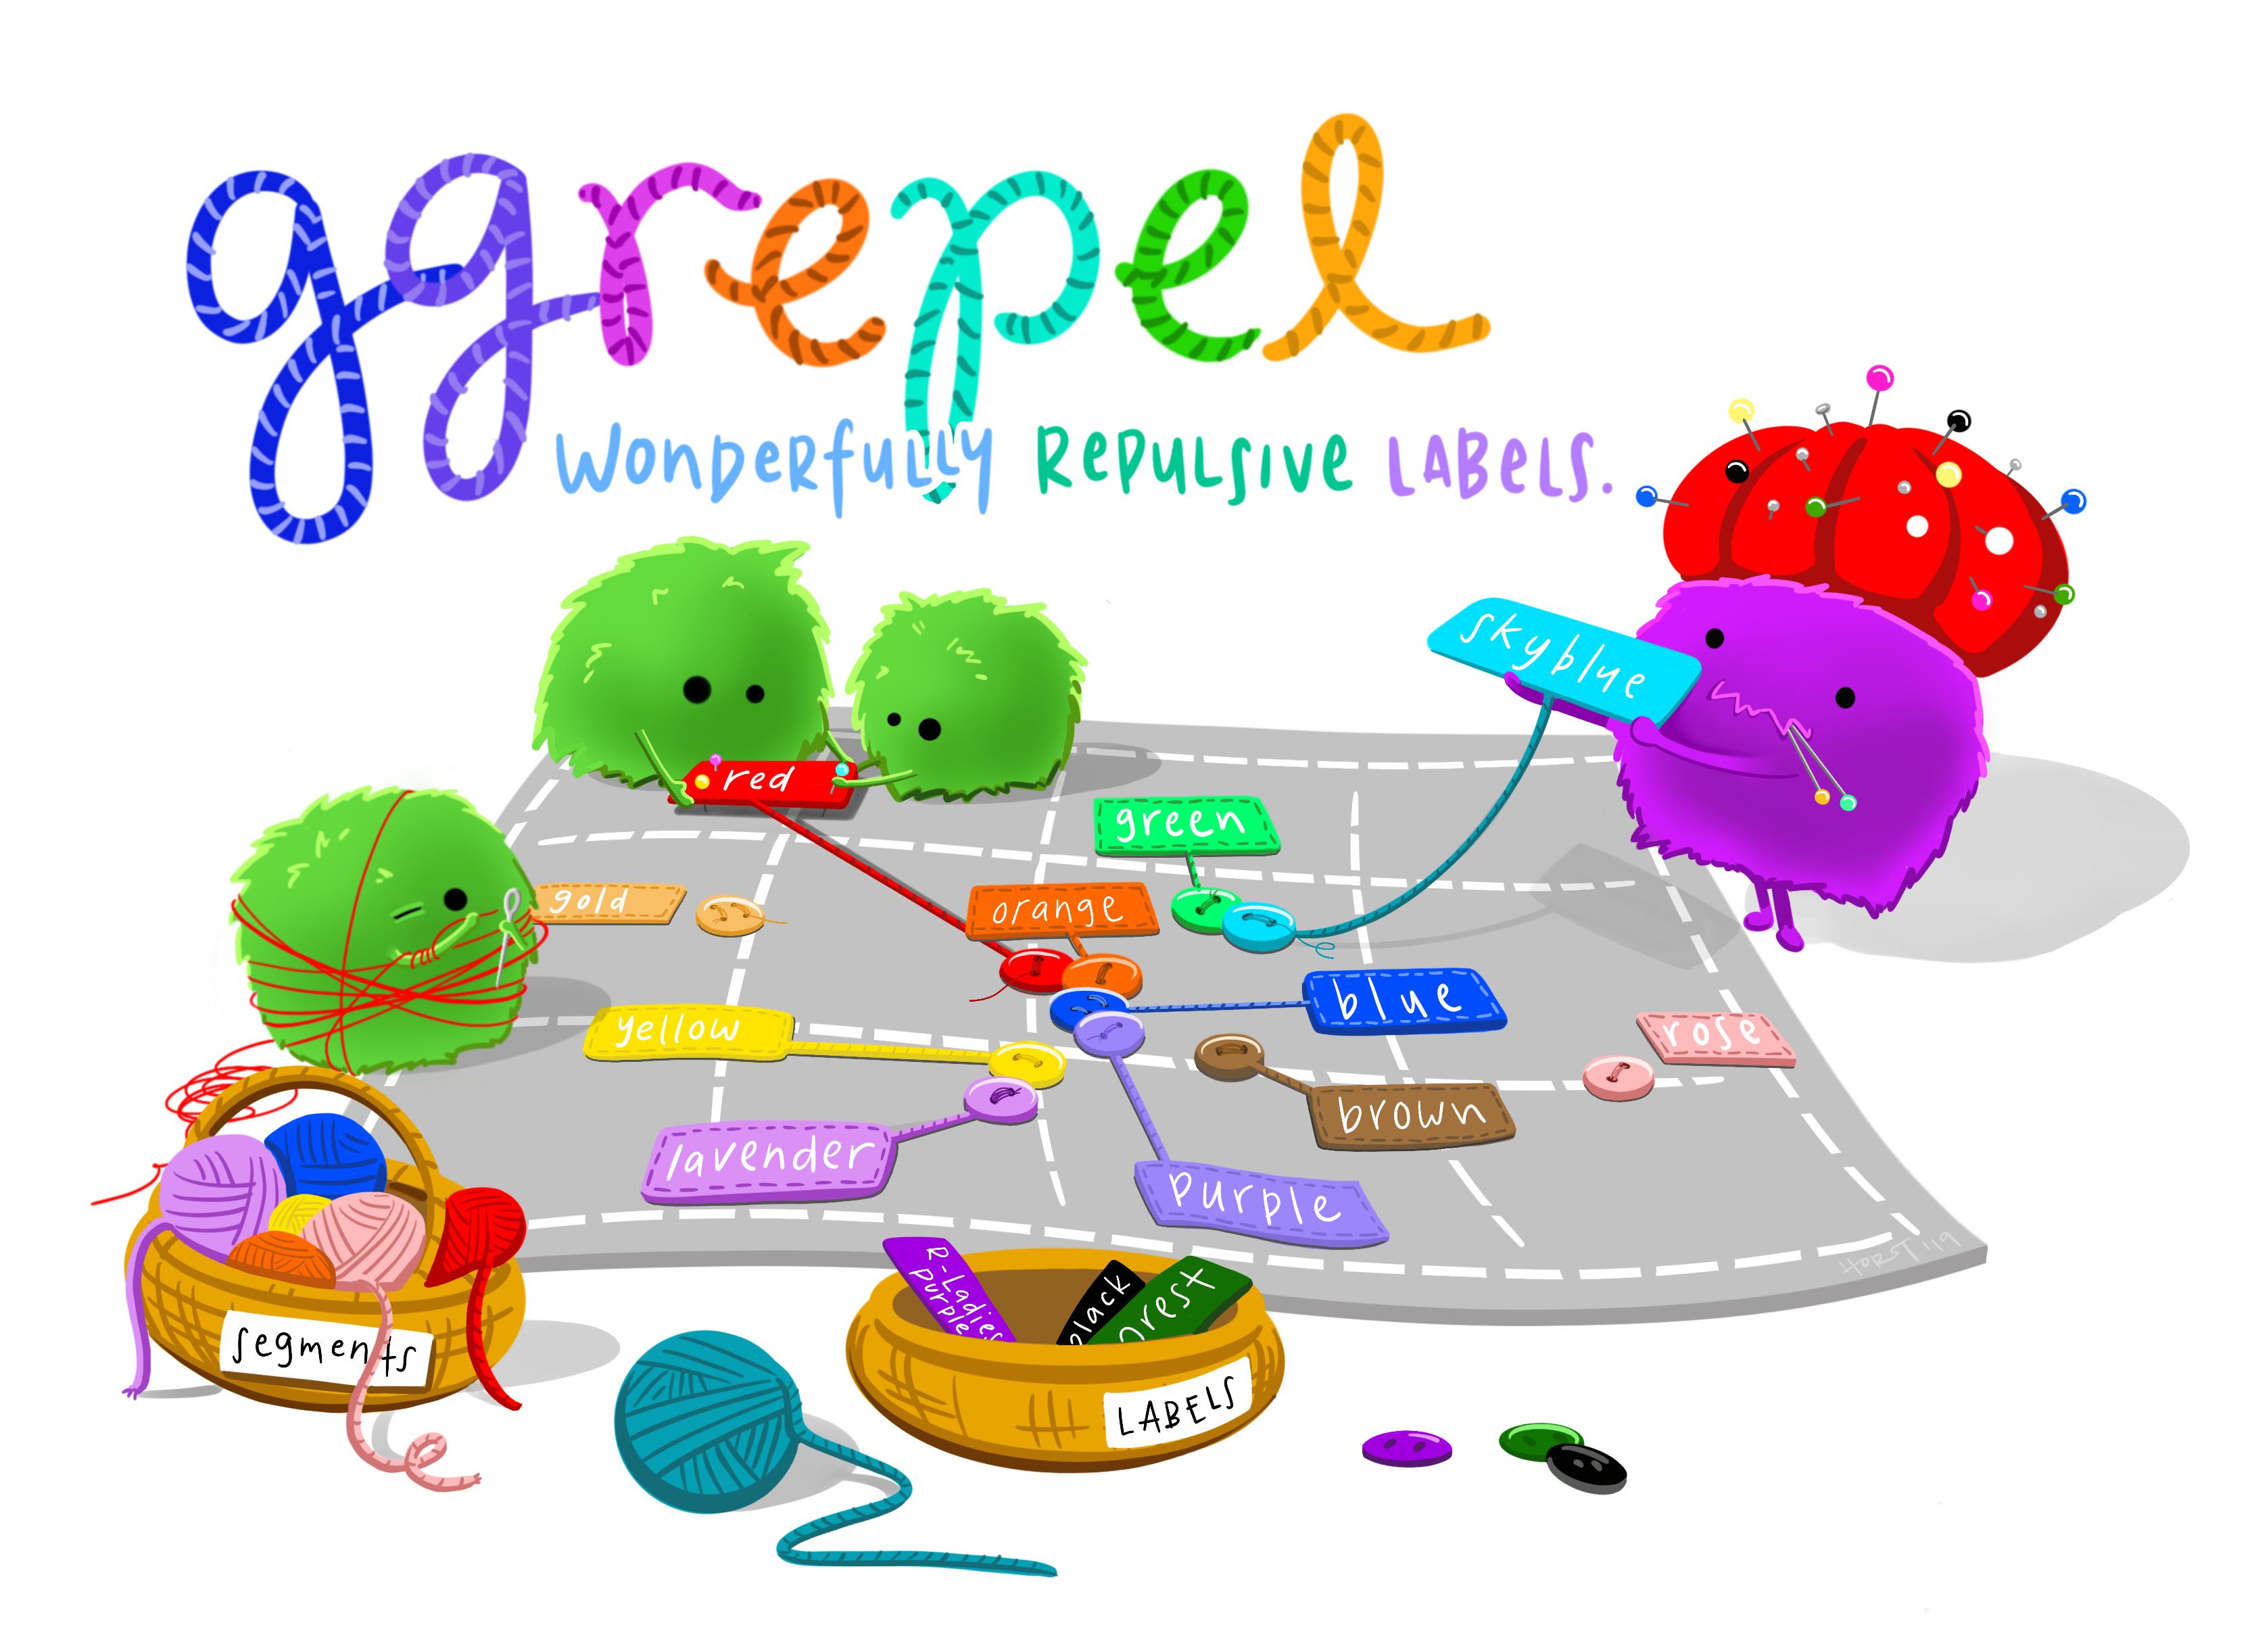 A cartoon that says ggrepel, wonderfully repulsive labels, and has some fuzzy monsters and a sewing theme making a plot with buttons, and labels that are repelled away indicating what color they are. There is a ball of yarn indicating segments, and patches indicating labels.